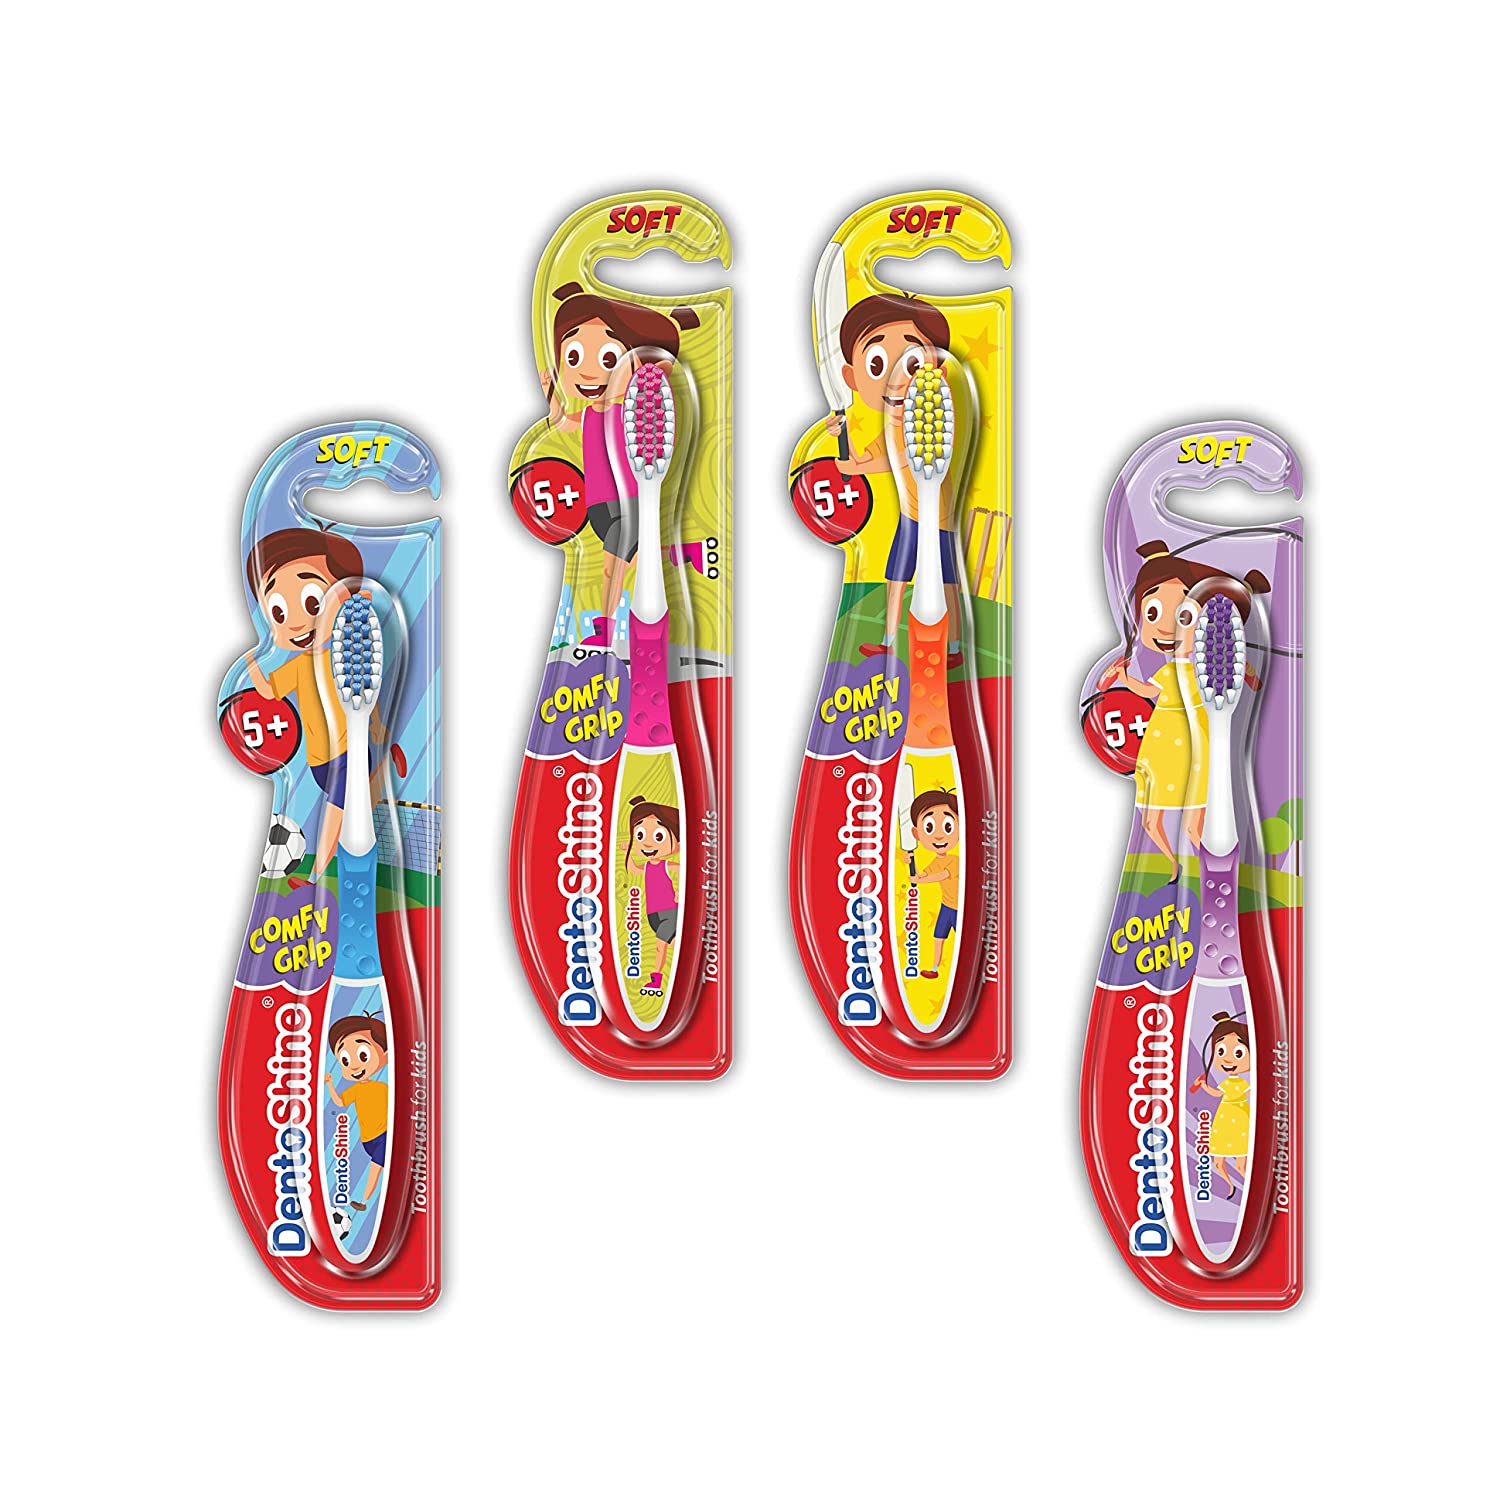 DentoShine Comfy Grip Toothbrush - Pack of 4 (Age 5+) - Laadlee